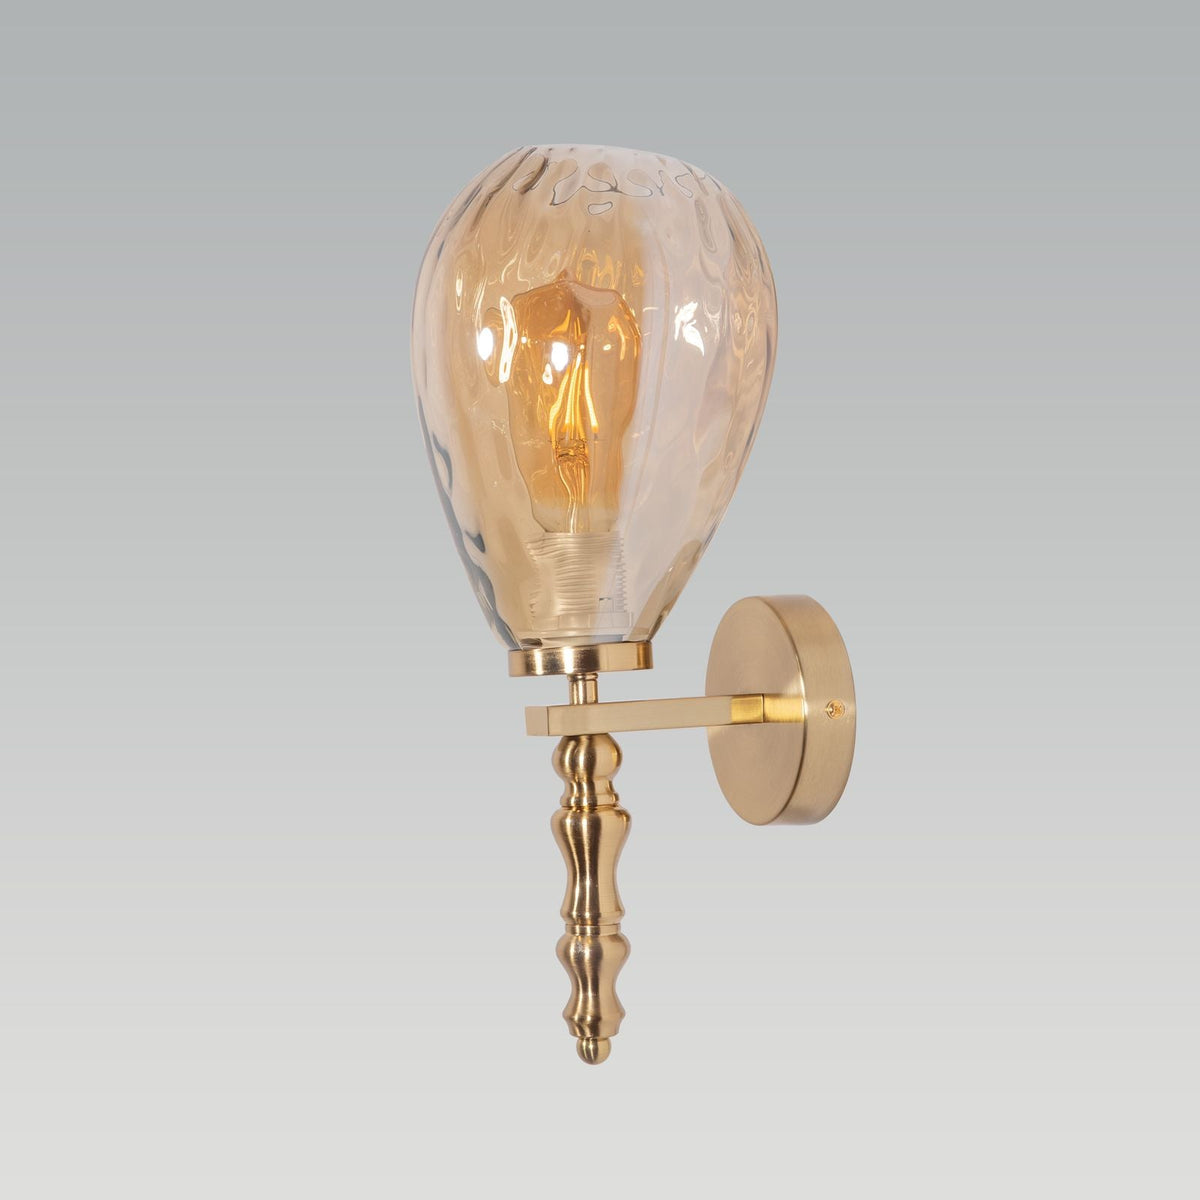 Buy Finding Glory Wall Lamp online